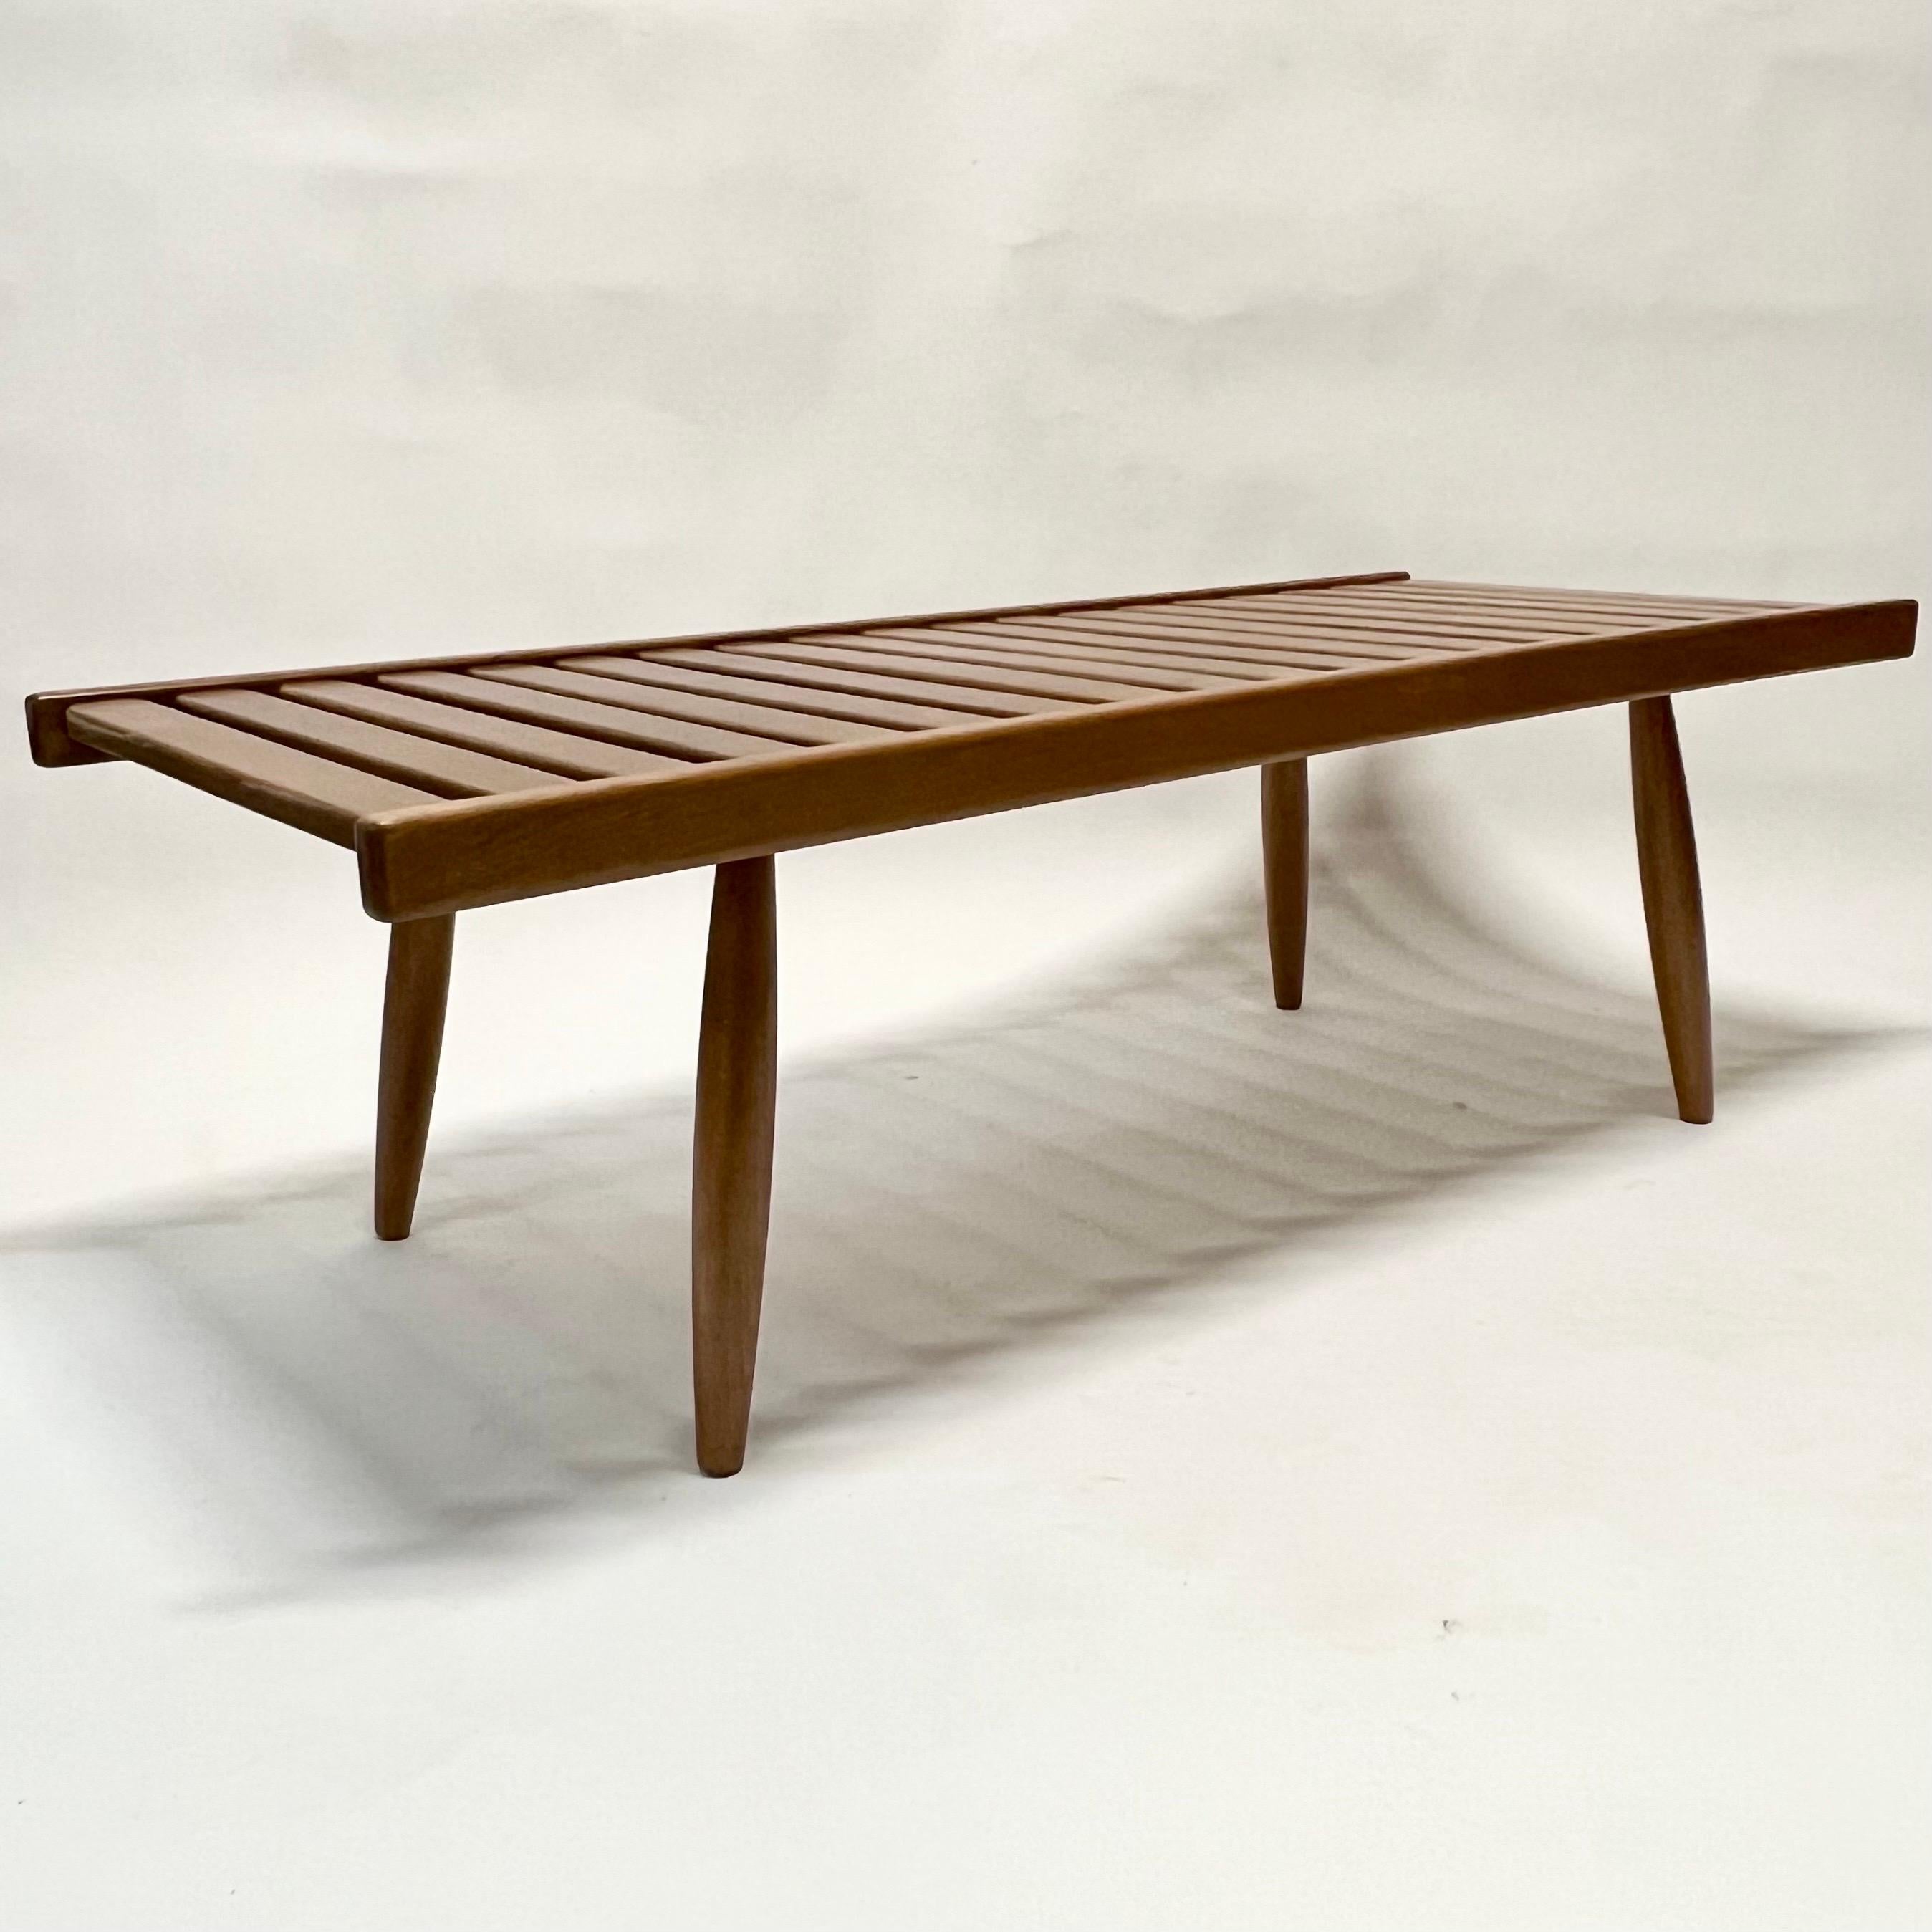 Vintage Japanese Wood Slat Coffee Table c1960s In Excellent Condition For Sale In Oakland, CA